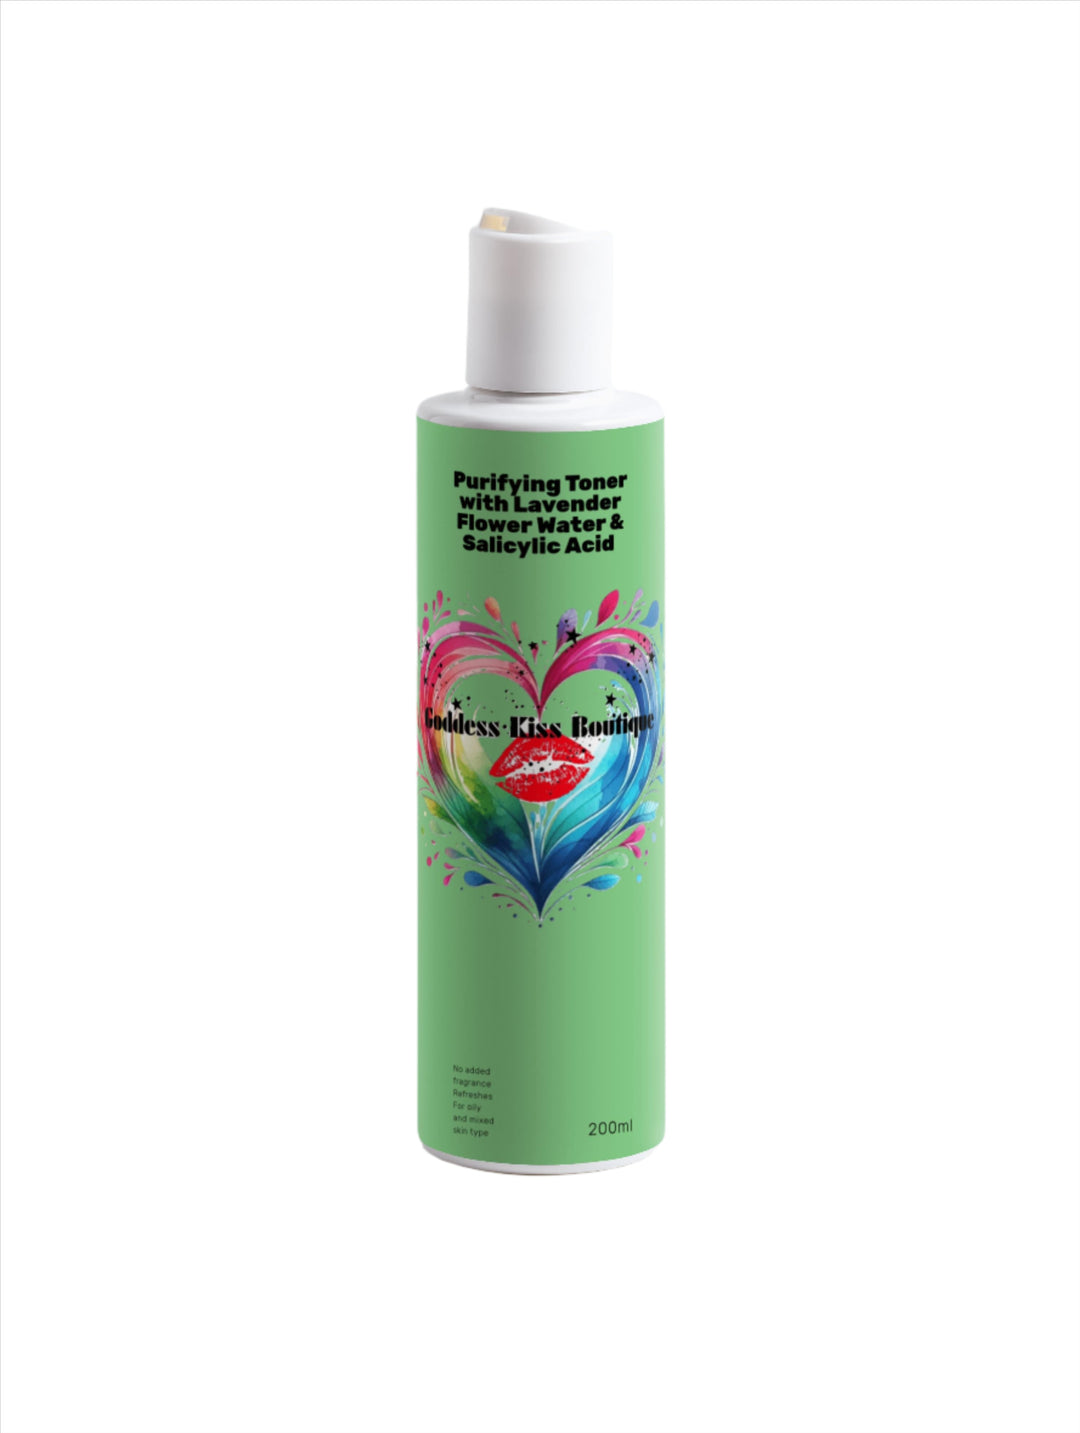 Purifying Toner with Lavender Flower Water & Salicylic Acid for Clear Pores & Fresh Skin